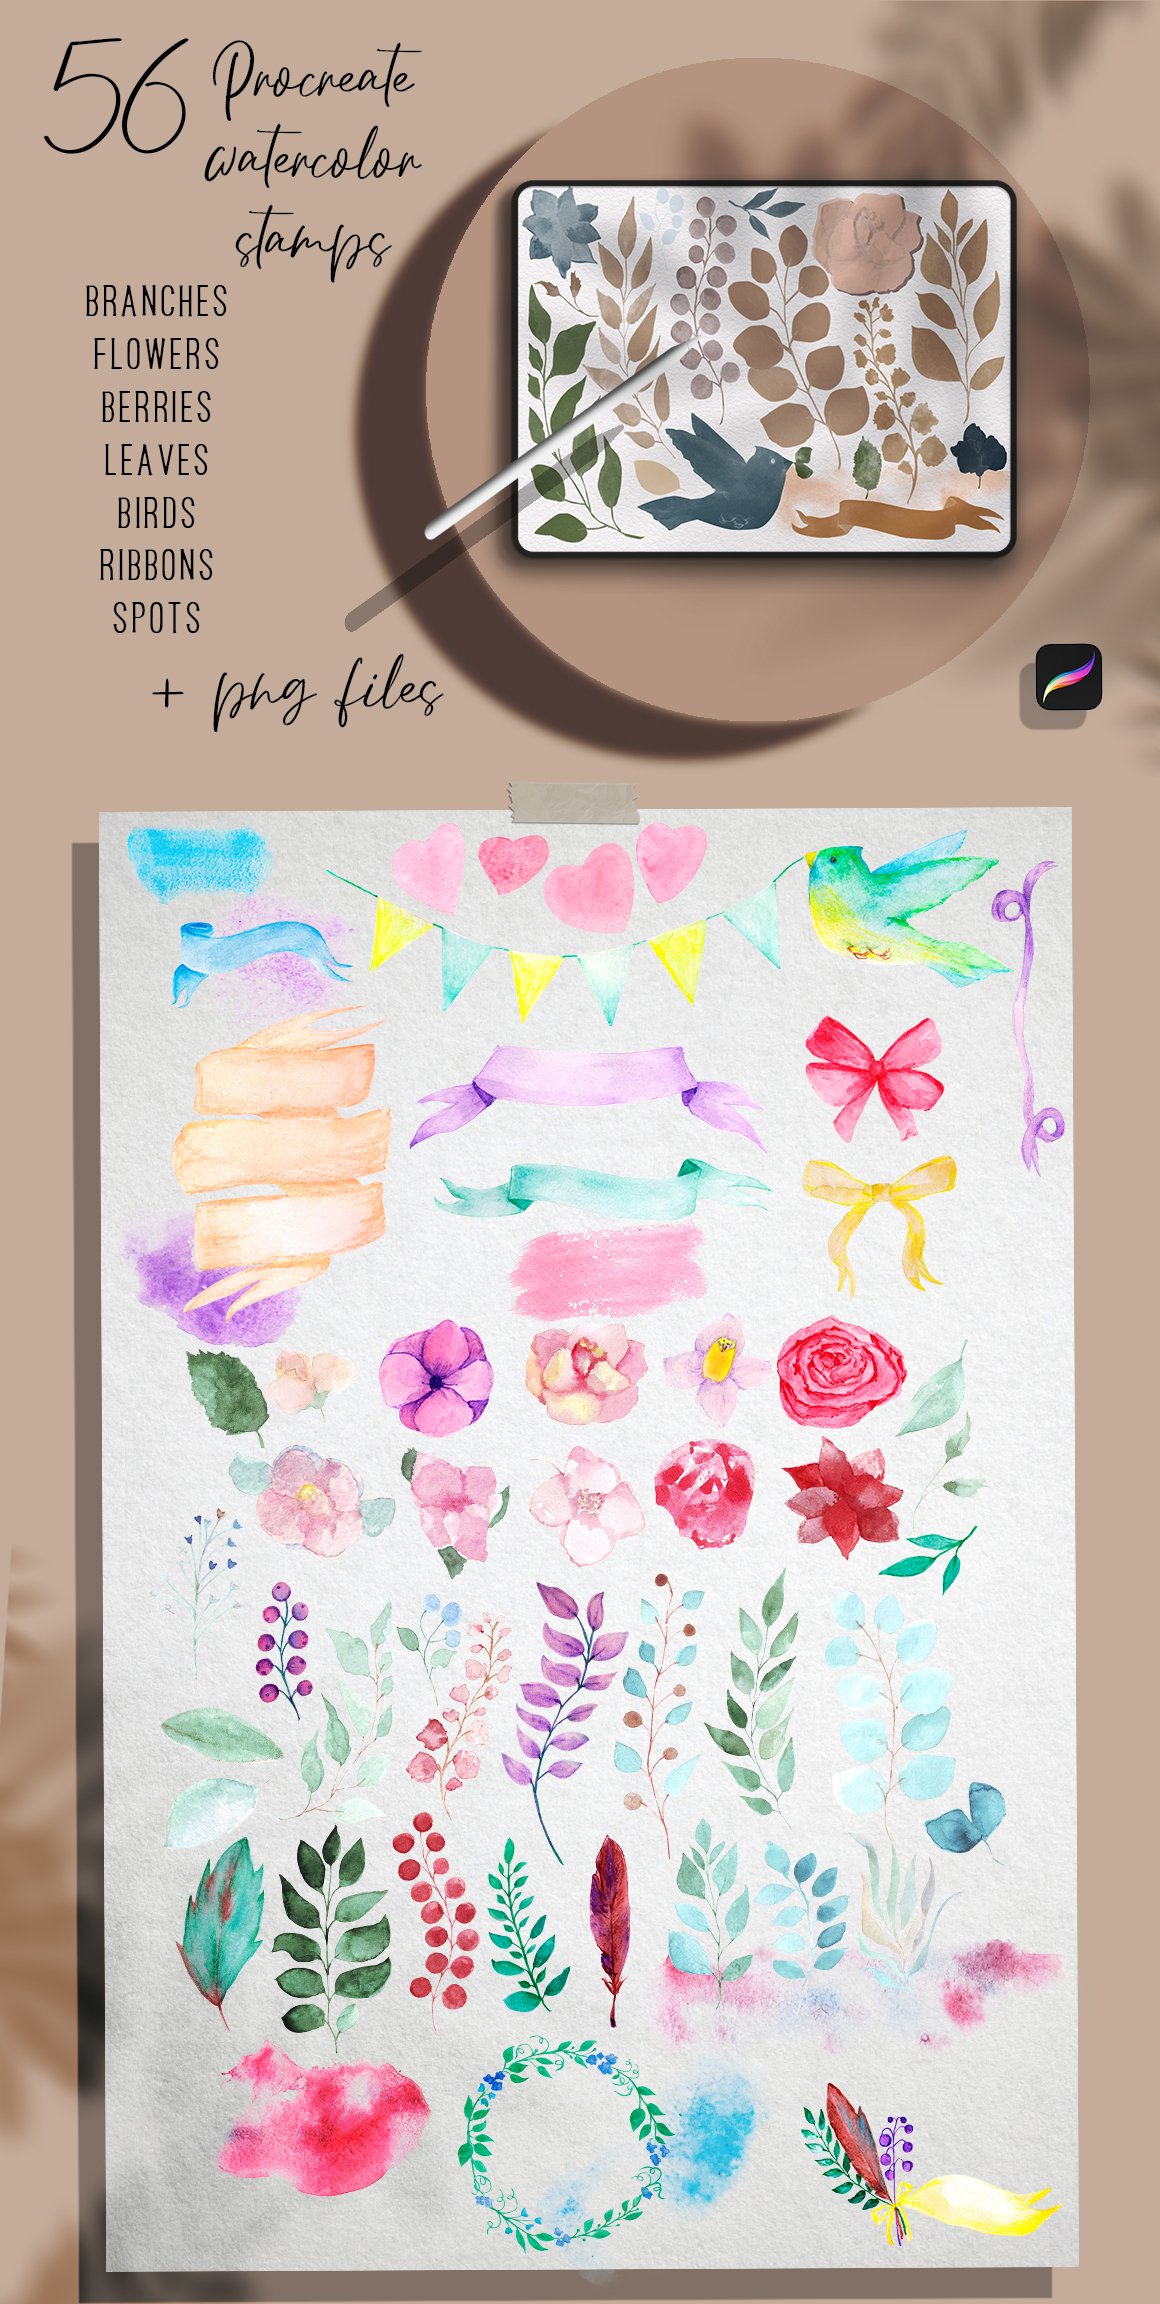 Procreate watercolor plant stamps.cover image.